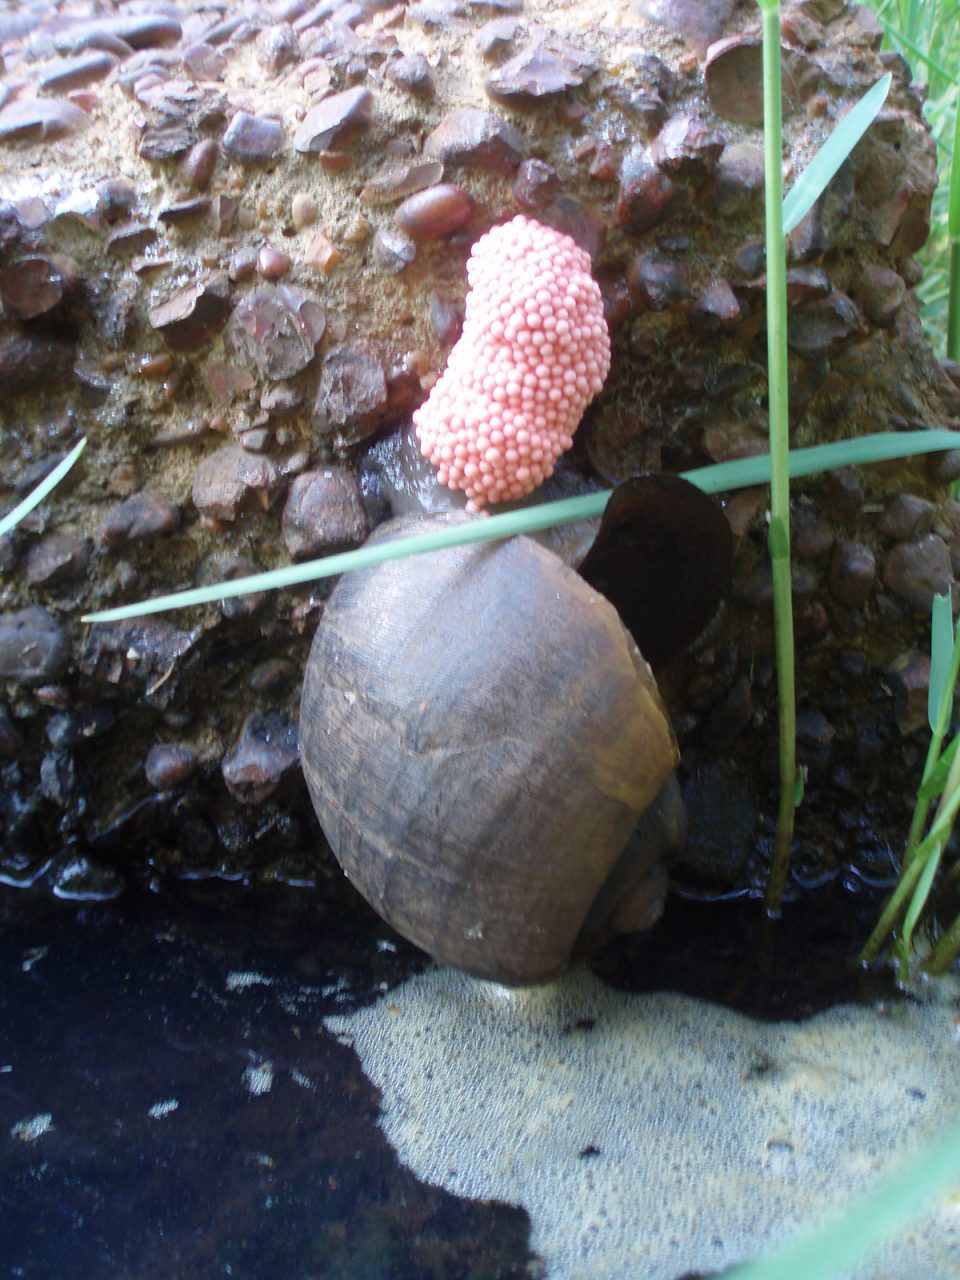 Apple snails lay clusters of bright pink eggs. Photo: North Carolina Wildlife Resources Commission